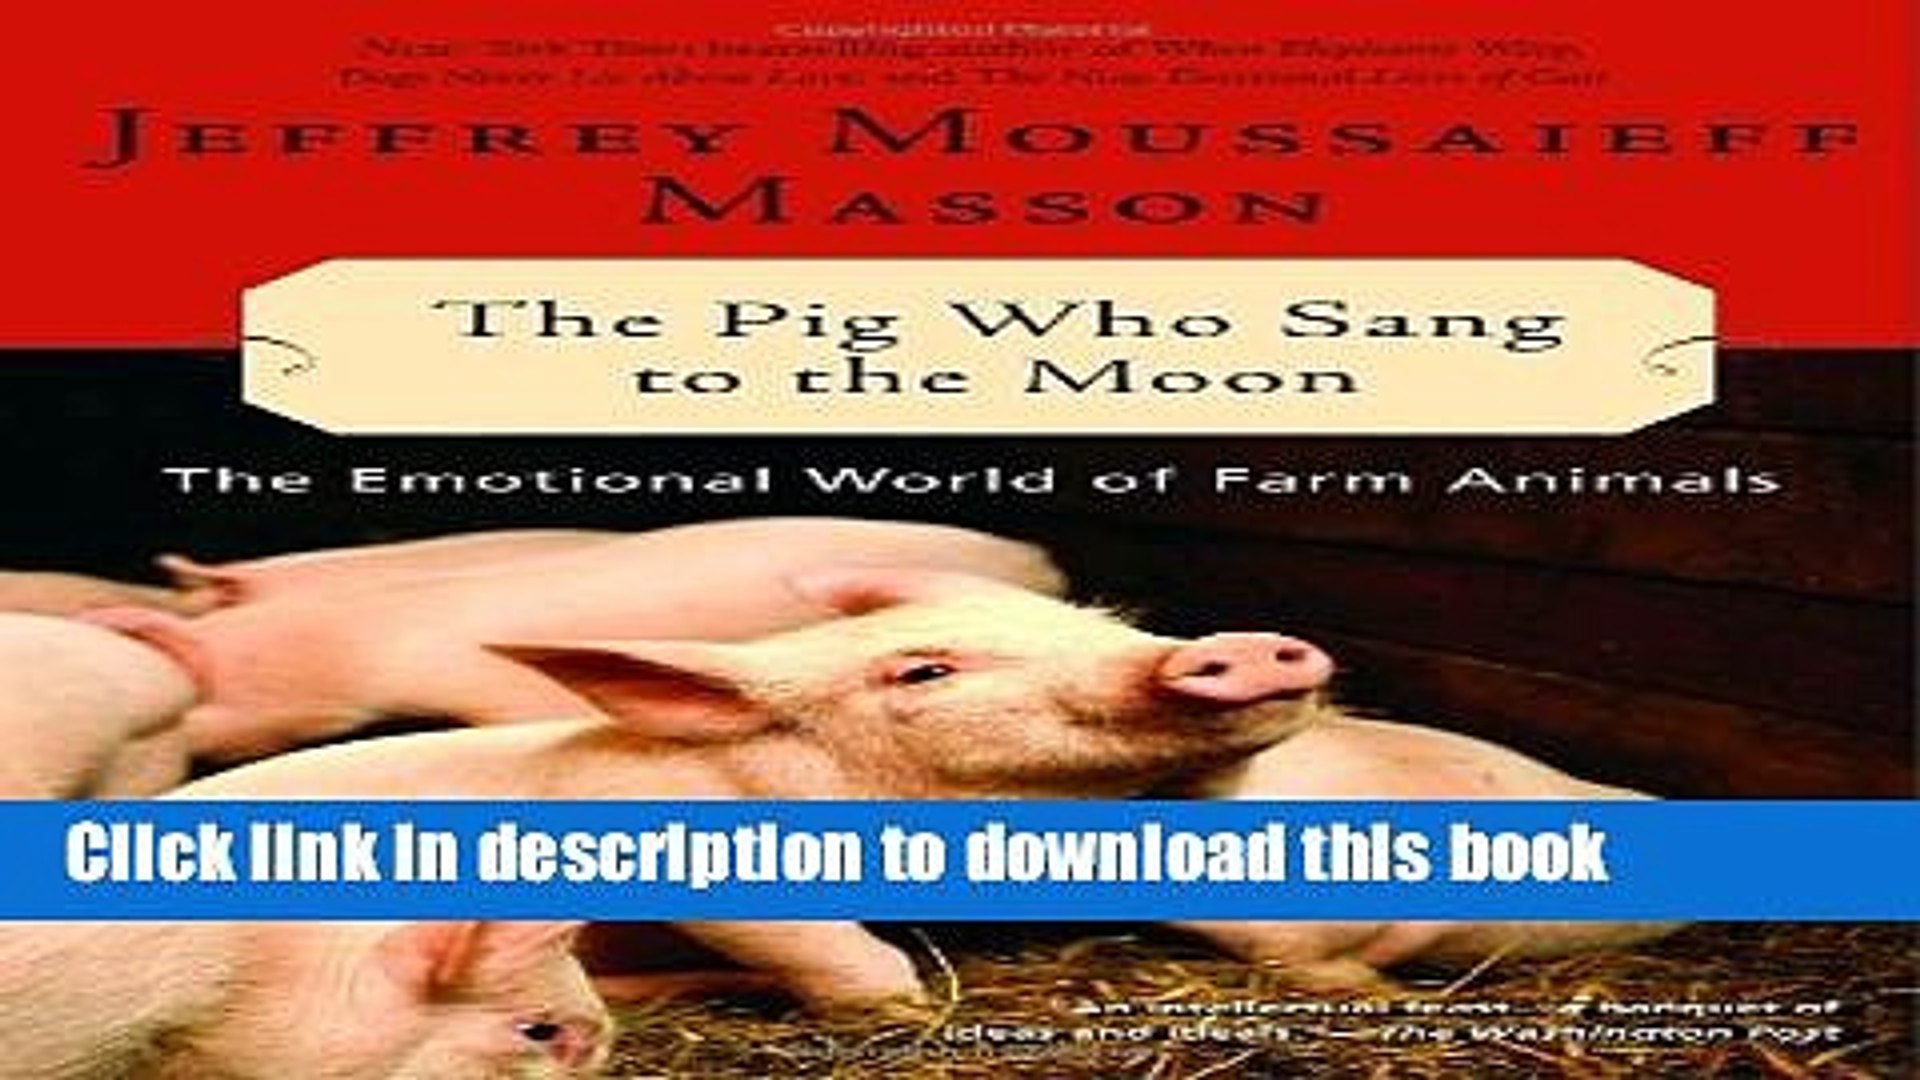 The Emotional World of Farm Animals The Pig Who Sang to the Moon